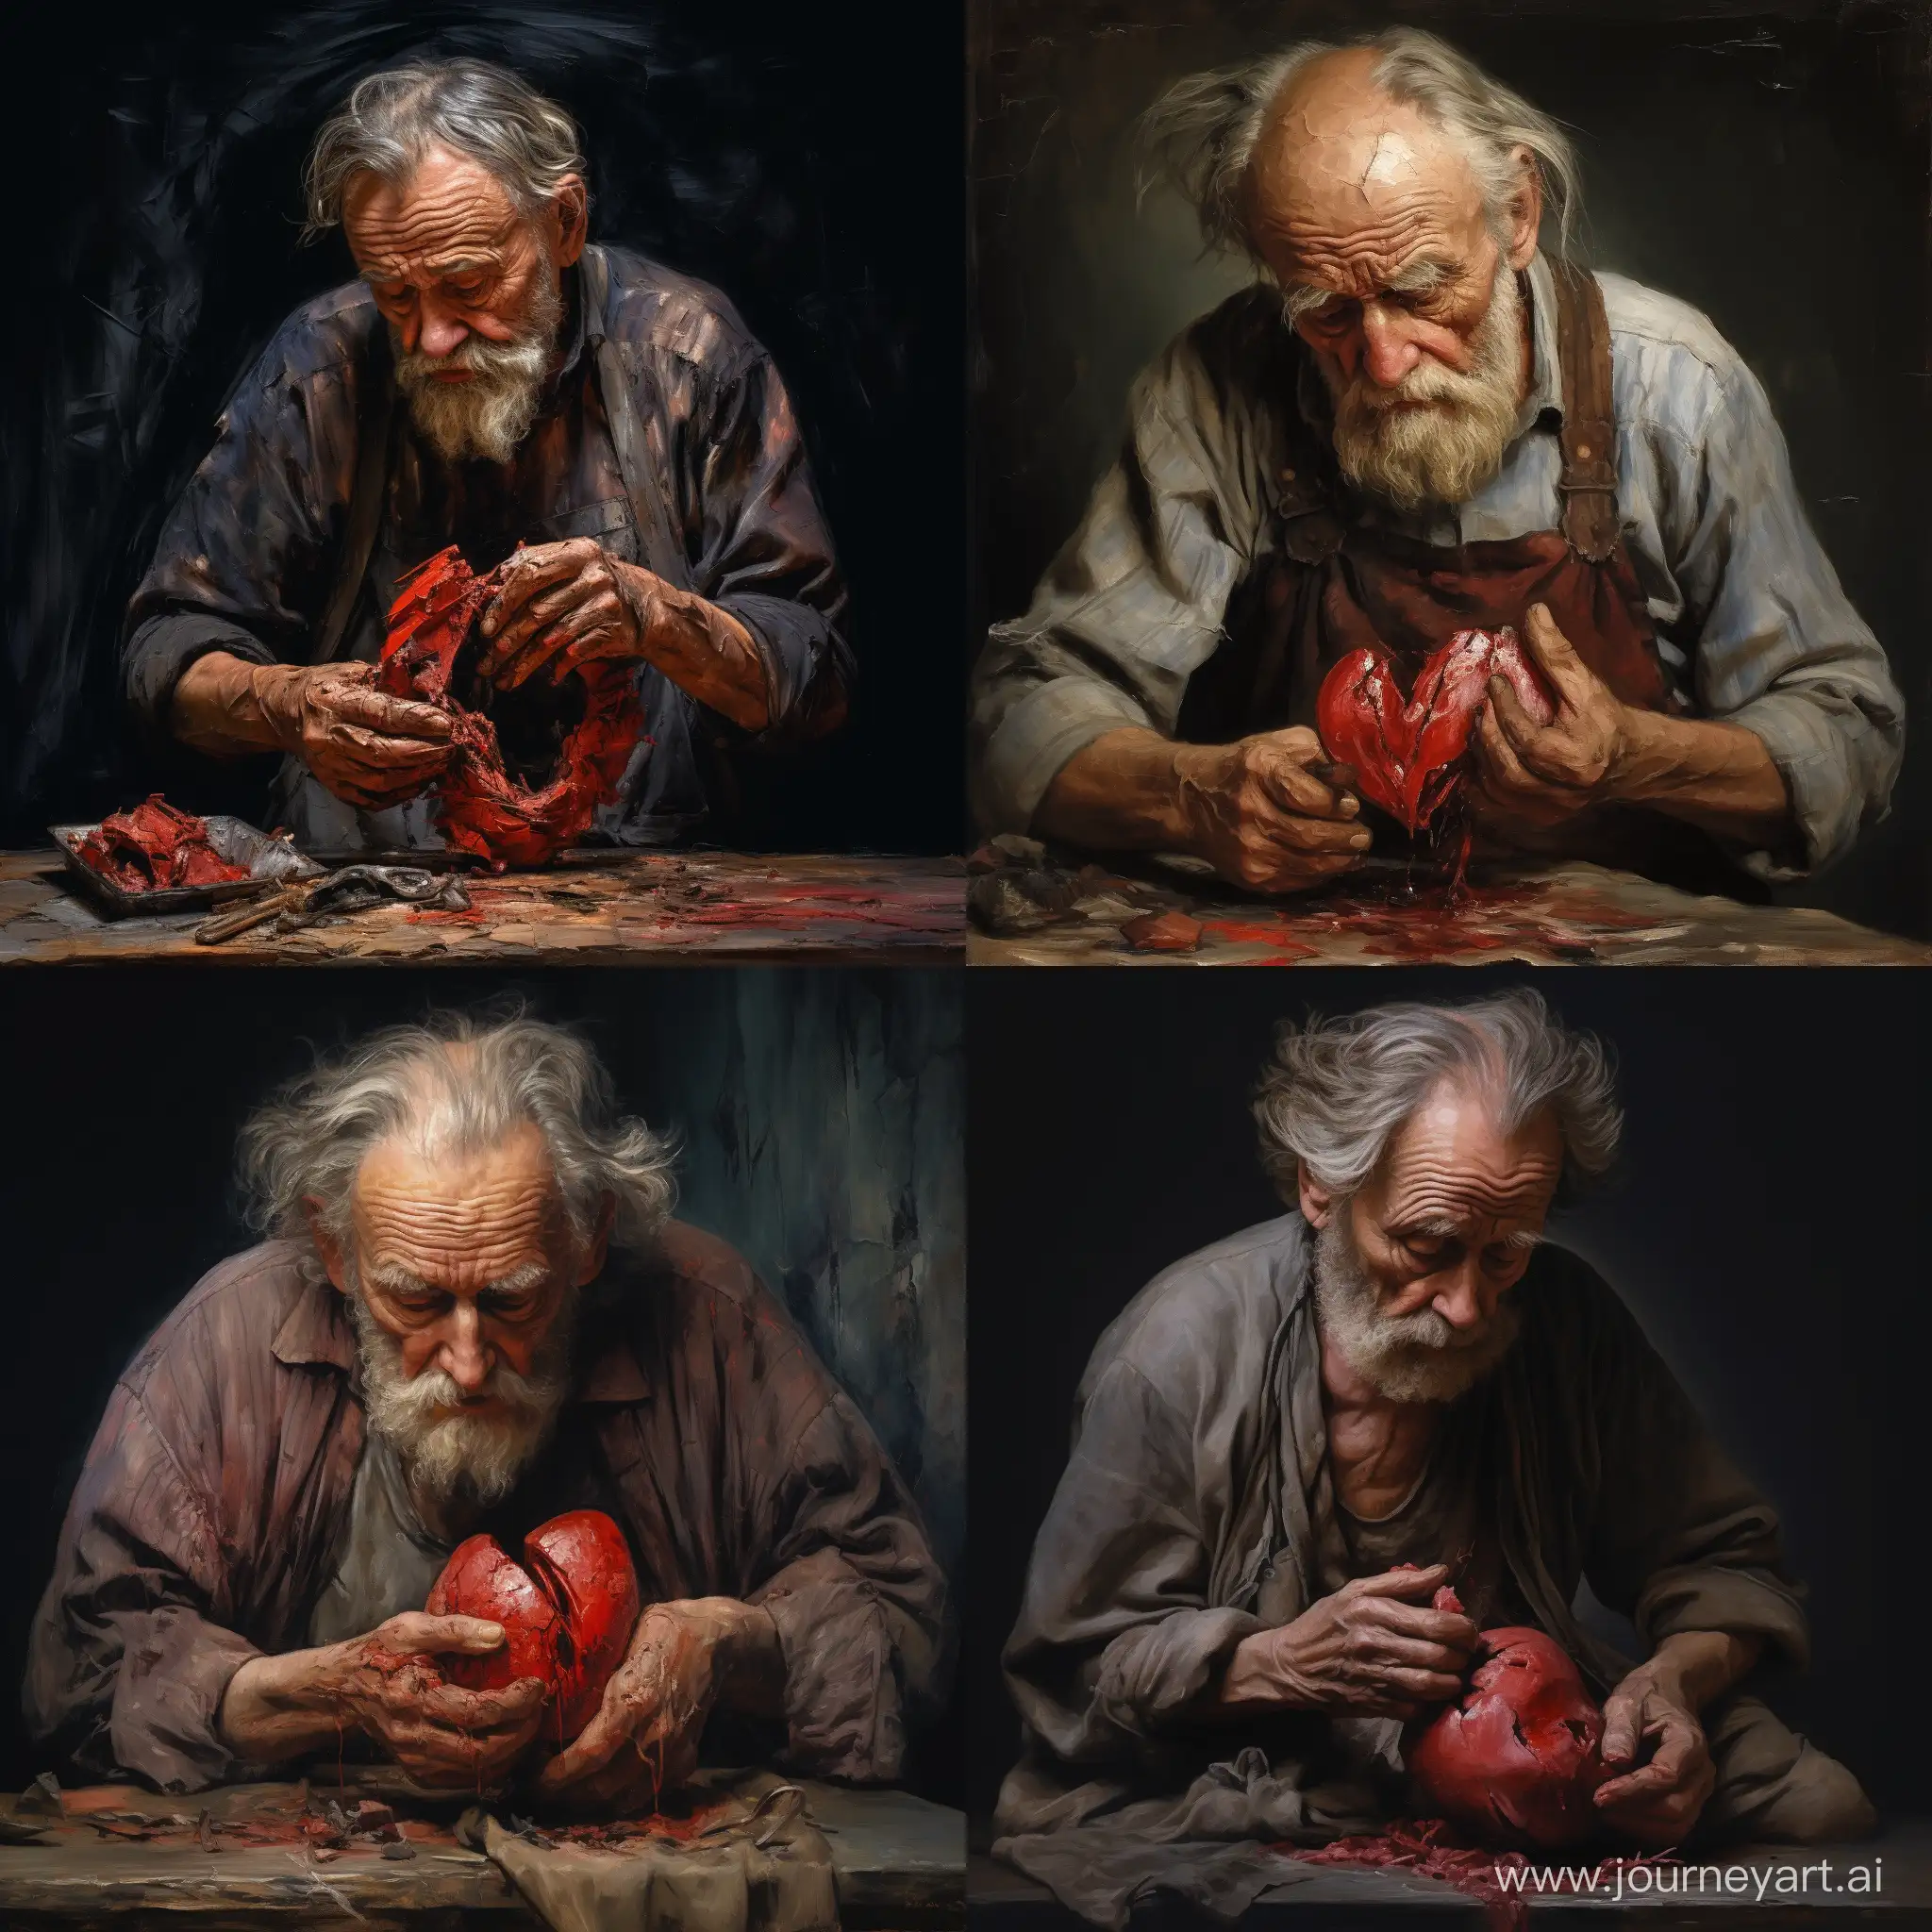 Elderly-Artisan-Mends-A-Fractured-Heart-Emotional-Oil-Painting-in-Rubens-Style